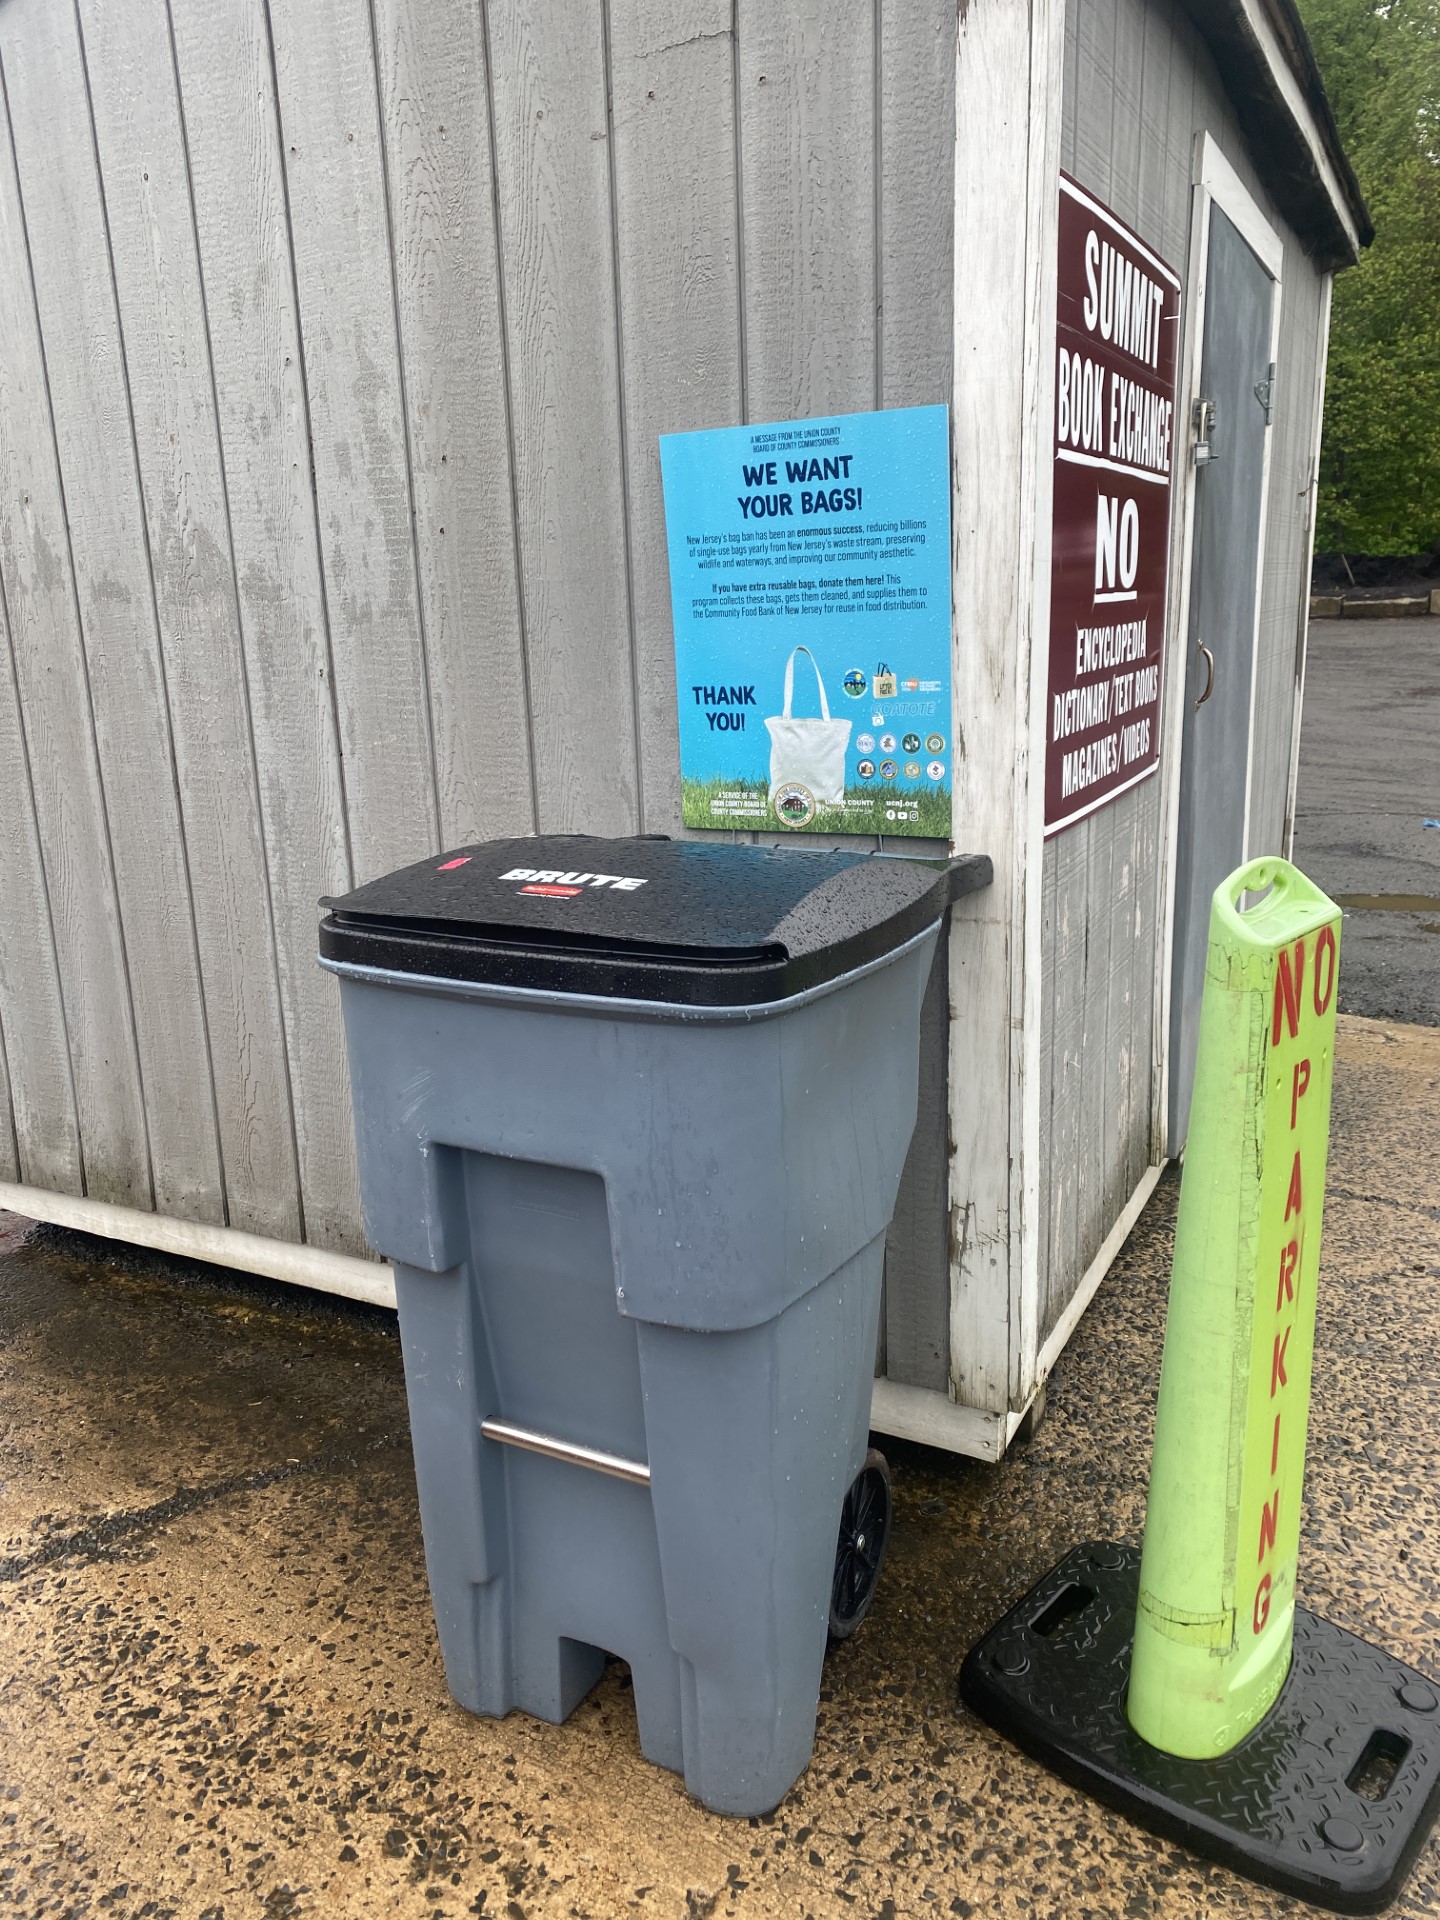 New Reusable Bag Collection Bin at the Municipal Transfer Station